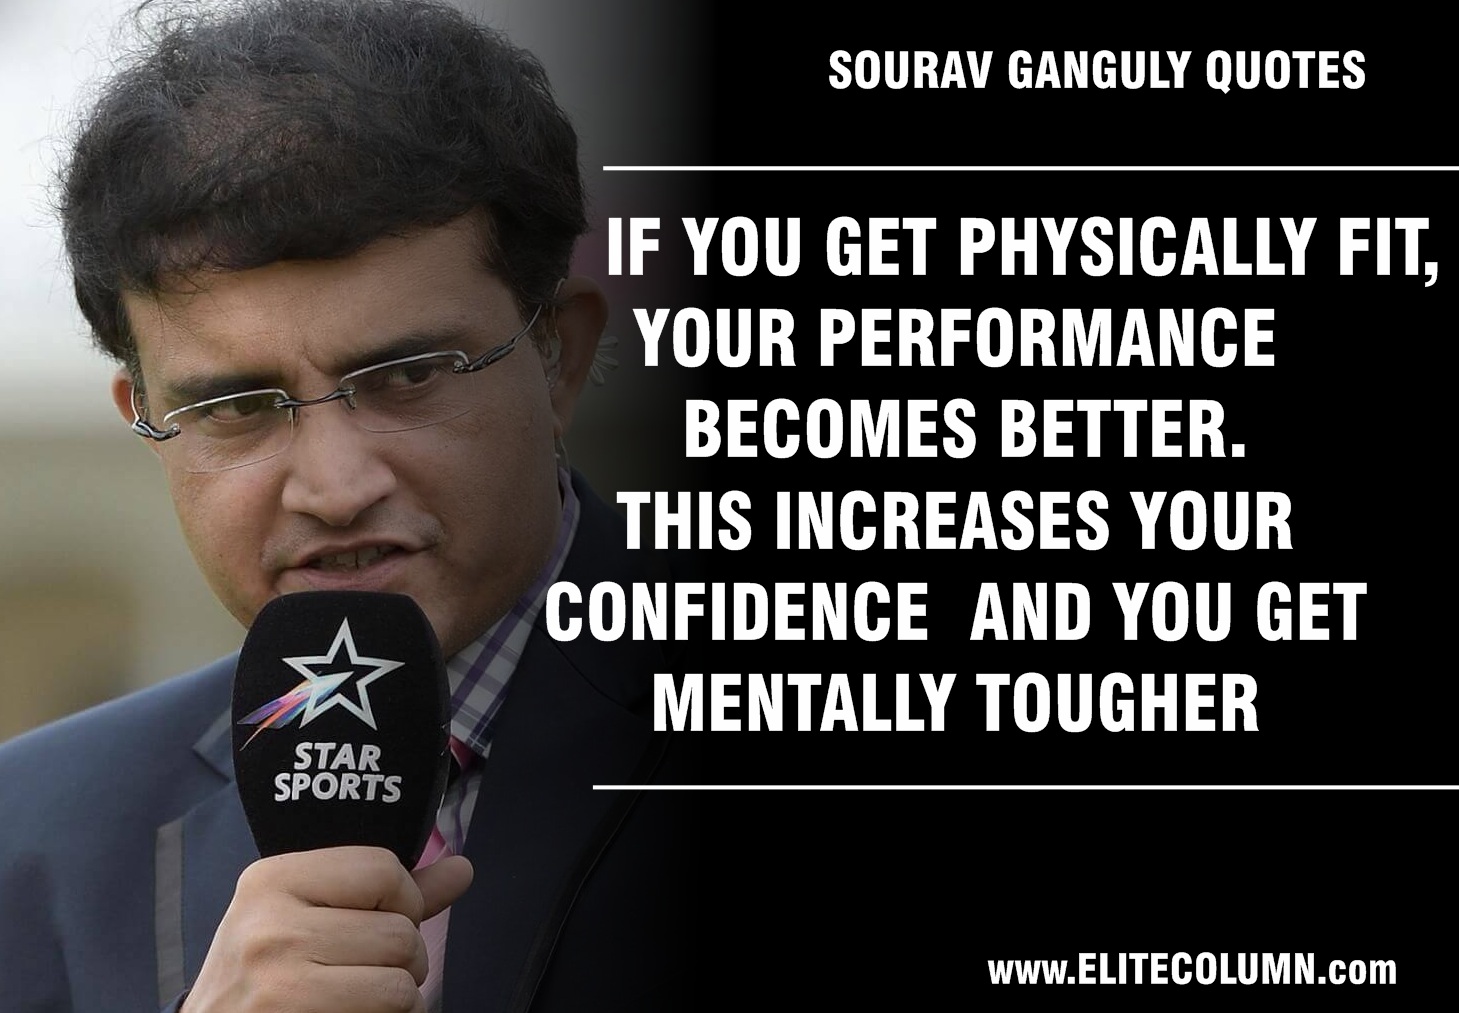 Sourav Ganguly Quotes (8)